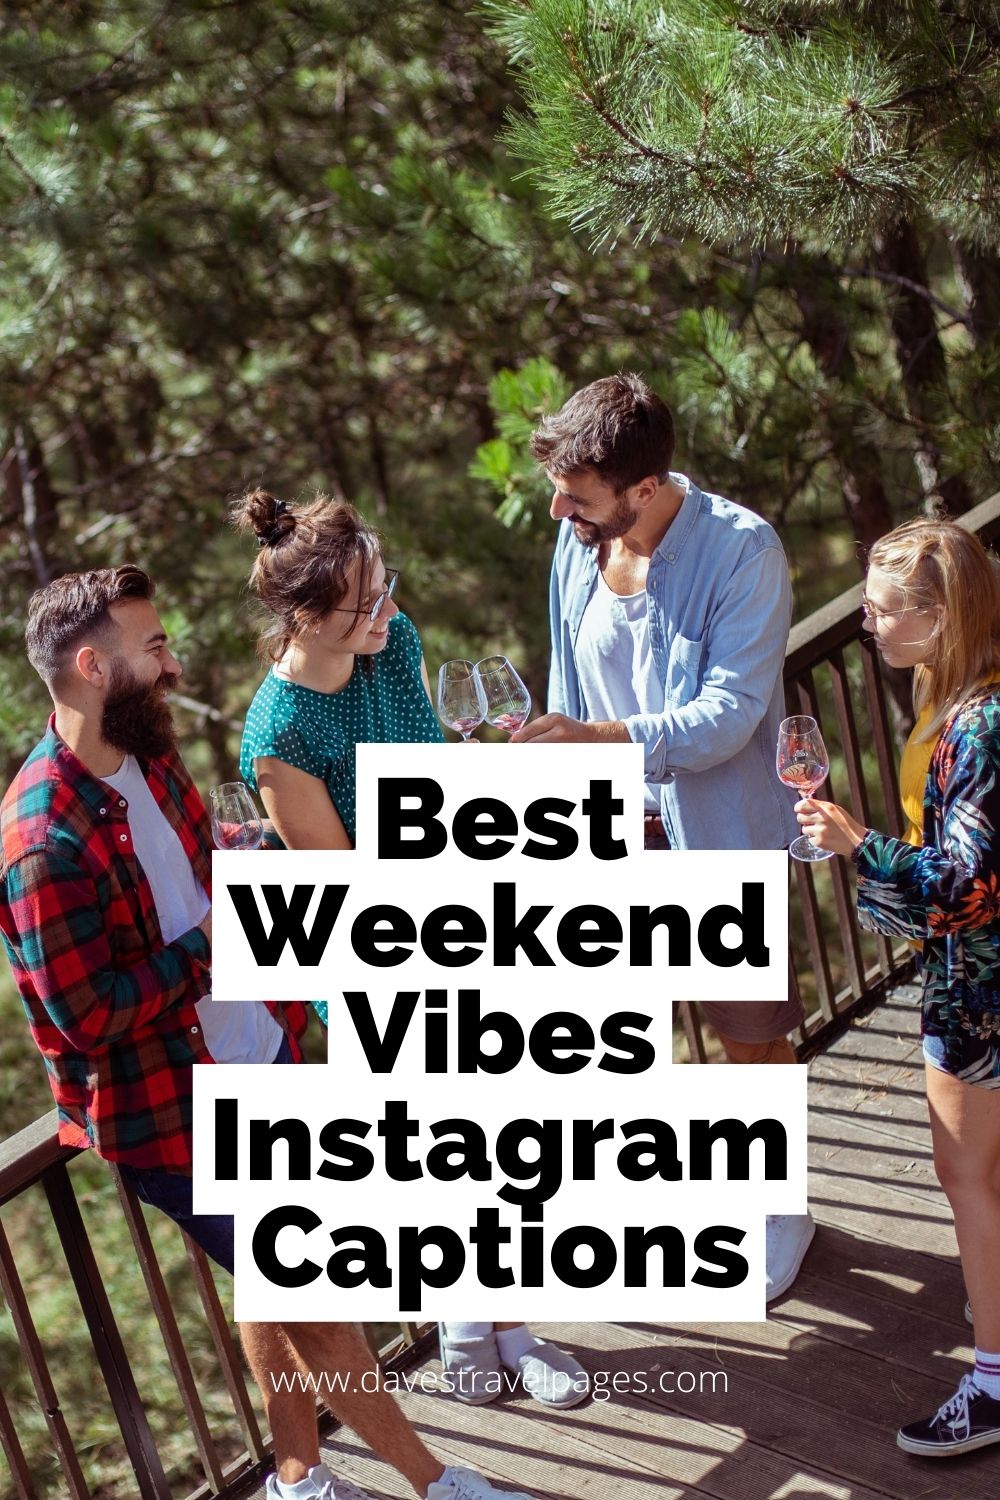 More Than 200 Awesome Weekend Captions For Instagram!